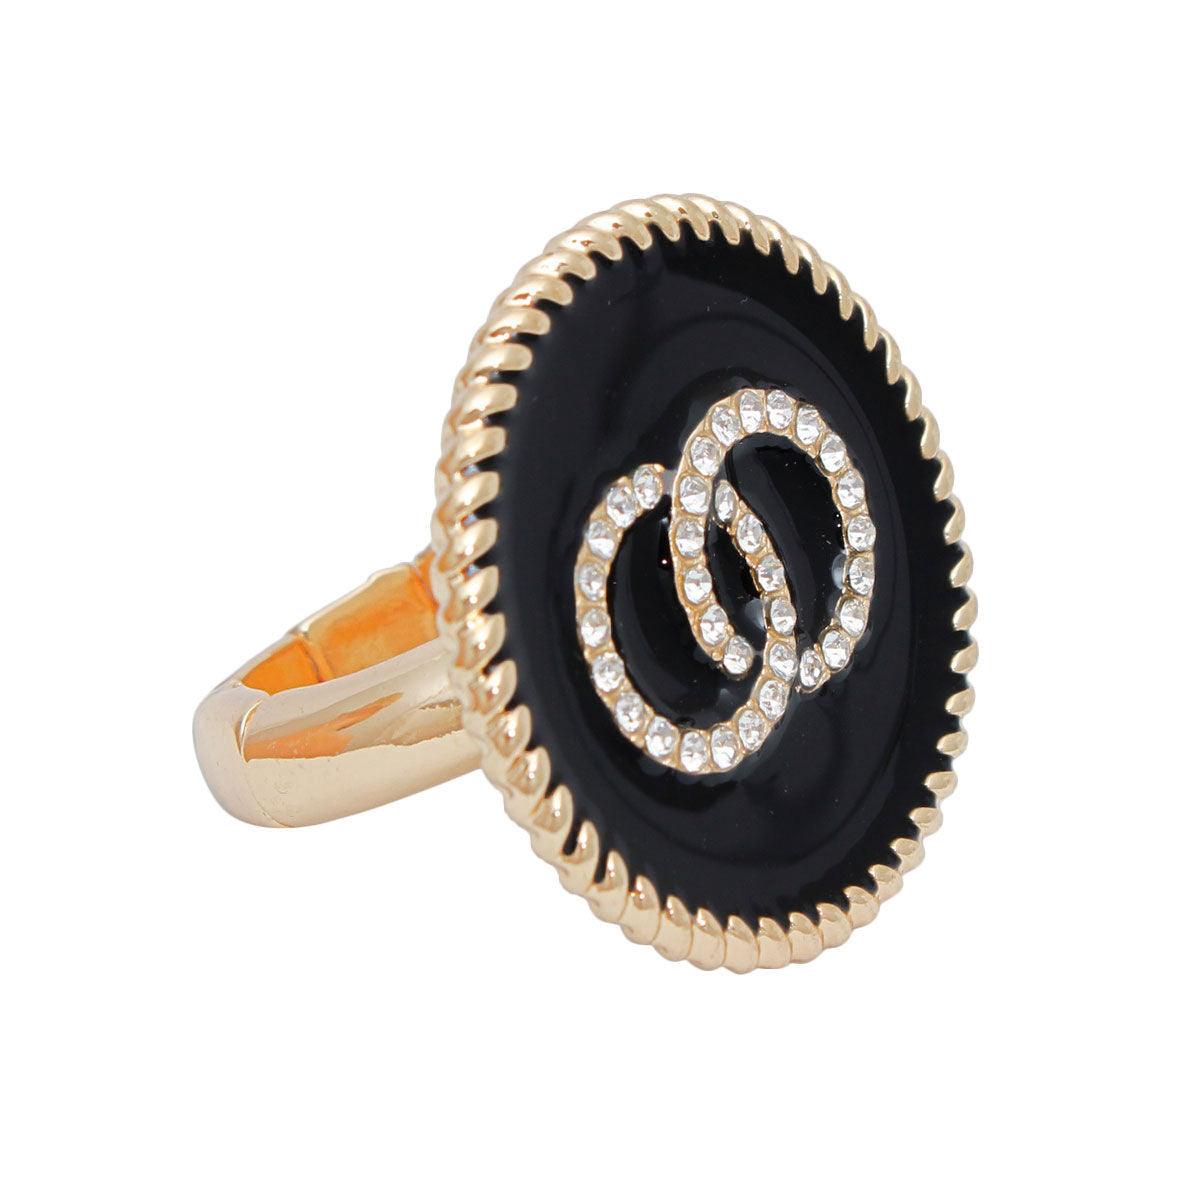 Get Noticed with the Black Medallion Cocktail Ring Infinity Statement - Fashion Jewelry